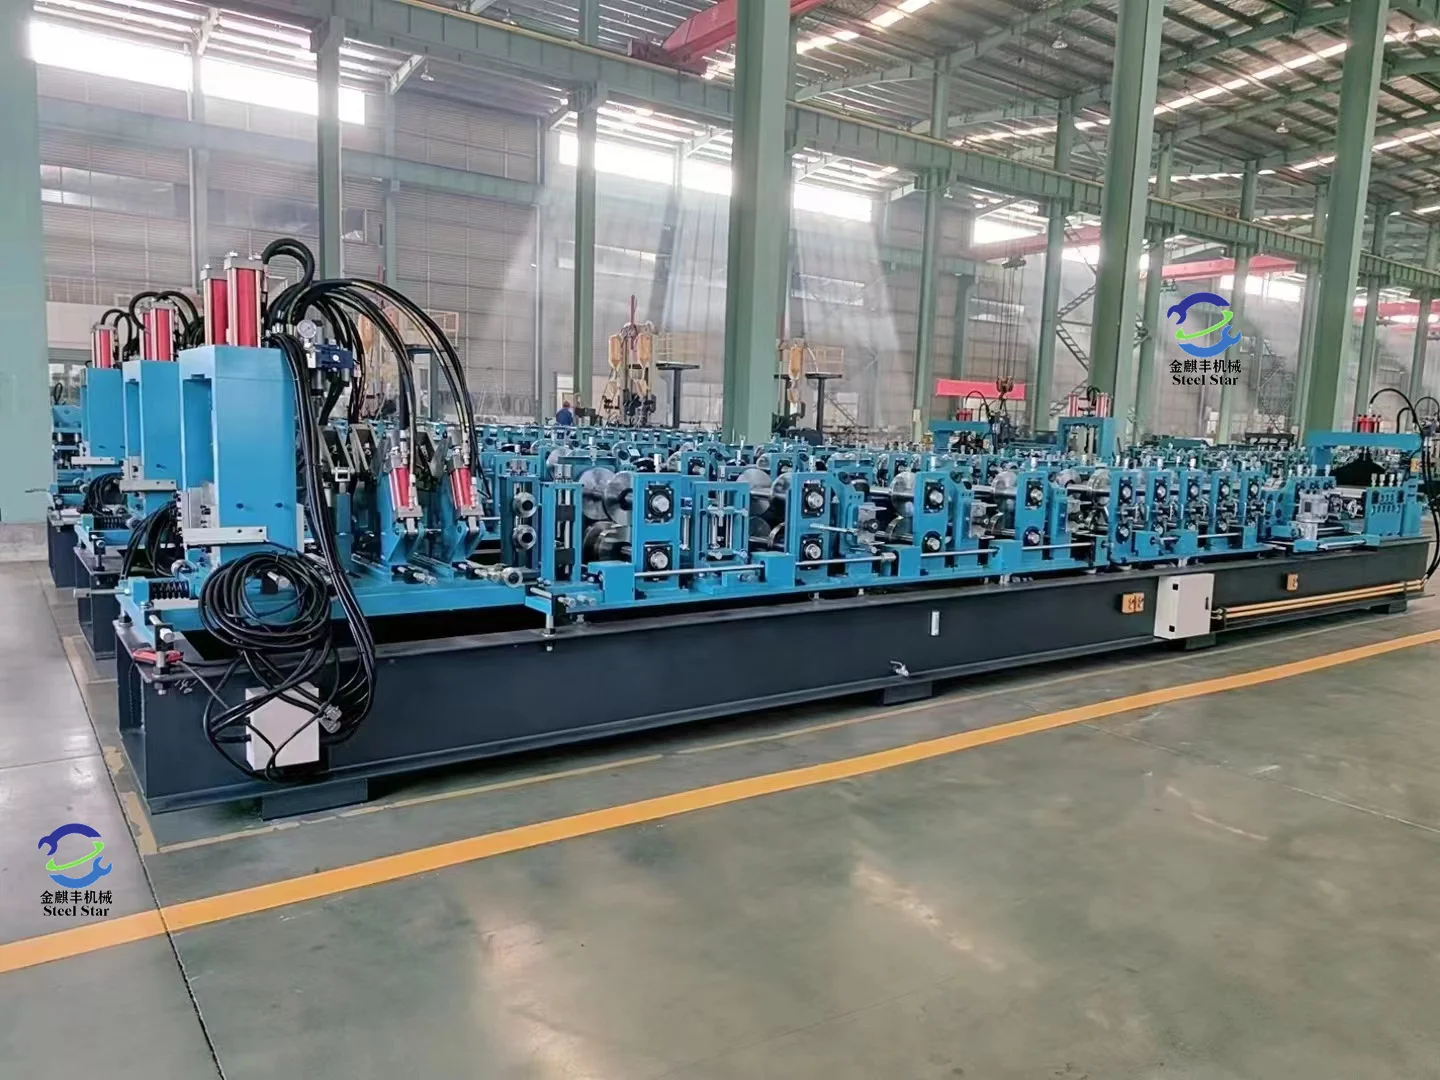 Fully automatic CZ all-in-one machine . C purlin roll forming machine . The C-shaped steel machine is a single-roll forming unit with a set of rollers that can produce CZ-shaped purlin products of various specifications. The machine mainly consists of a passive loading rack, leveling device, punching device, post-forming cutting device, hydraulic station, computer control system, etc. This machine adopts automatic flying saw punching and is easy to operate. The main purpose of the CZ-shaped steel machine is that it can be used as the main stress-bearing structure of large and medium-sized industrial and civil buildings.
Z purlin roll forming machine . CZ interchangeable roll forming machine.What is a C purlin?What size is purlin C?Which is stronger C purlin or Z purlin?How much is C purlins in Philippines?
How far can 4 inch C purlin span?
What is the alternative to C purlins?
What are the advantages of C purlins?
What are the disadvantages of purlins?
Can C purlins be used as rafters?
What are Z purlins used for?
Can C purlins be used for flooring?
What is the maximum thickness of C purlins?
How do I choose a purlin size?
How do you join two C purlins together?What are the advantages of Z purlins?
What are the advantages of C purlins?
What is the maximum span of Z purlins?
What is the yield strength of C purlin?